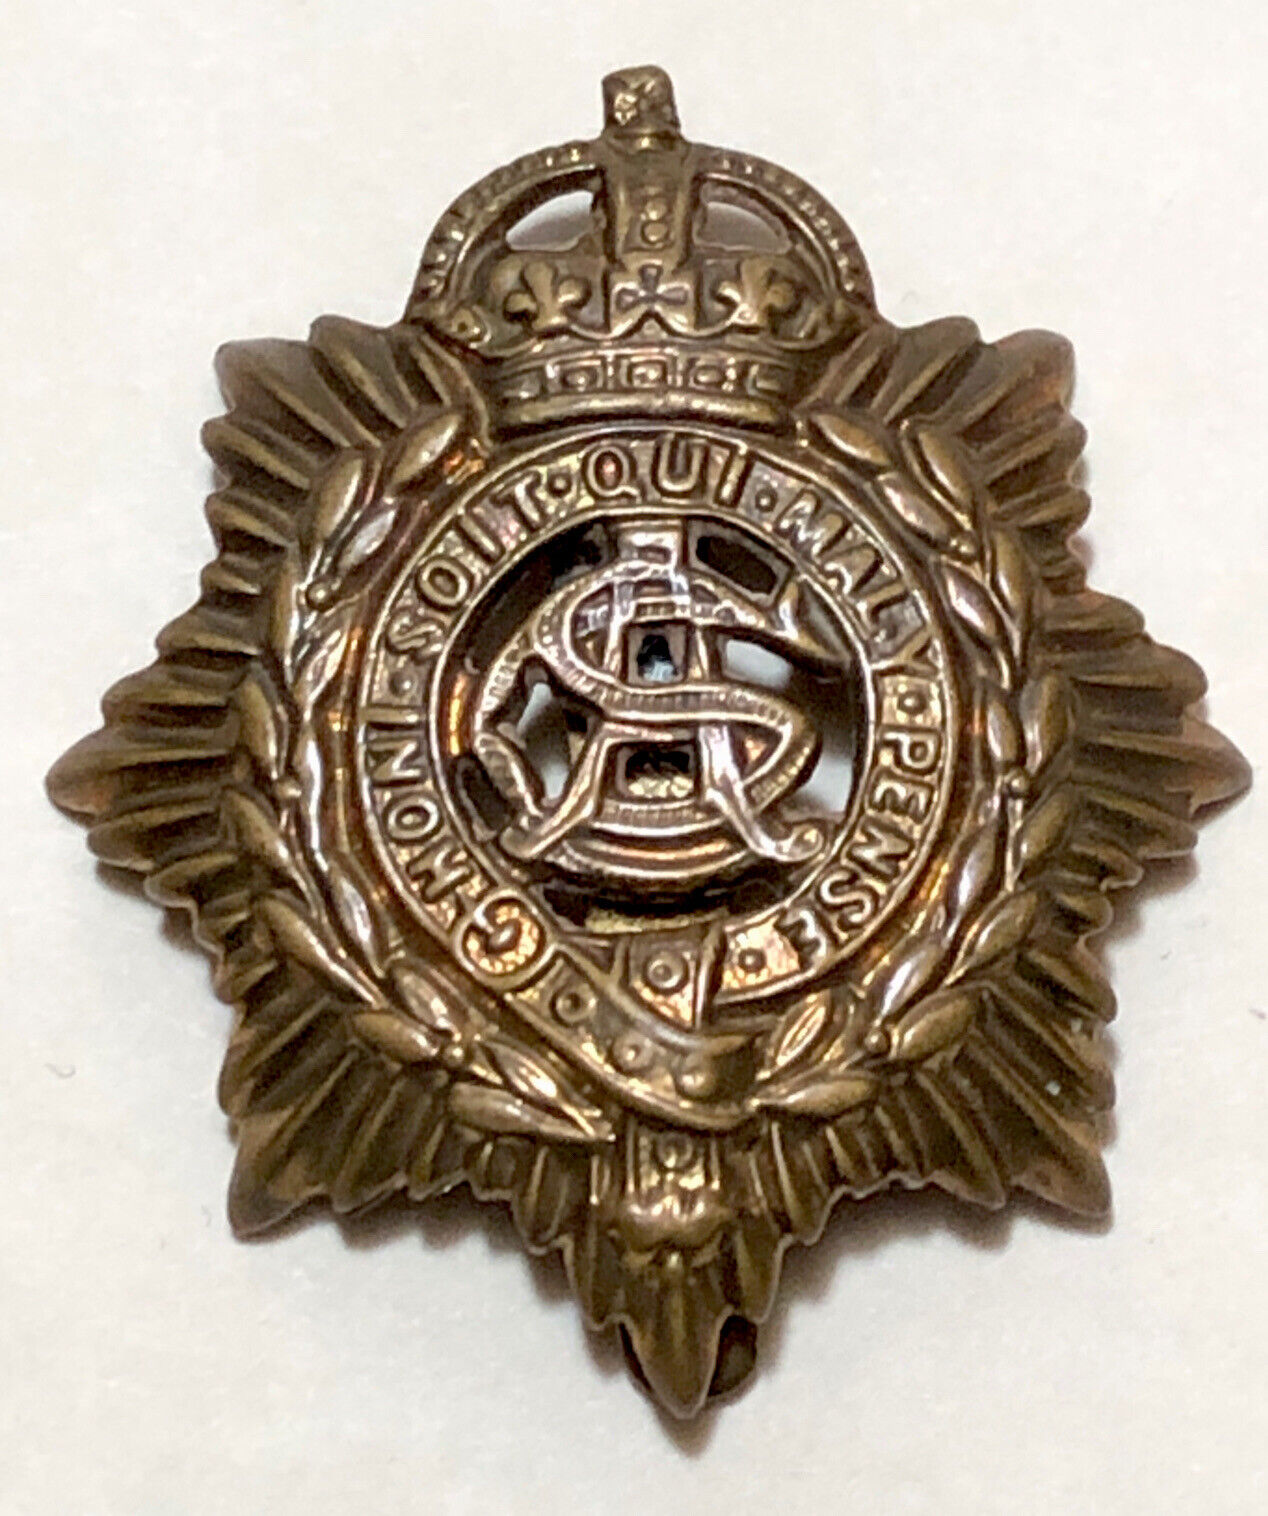 British Military Cap Badge, The Army Service Corps, Ww1, 1914-1918